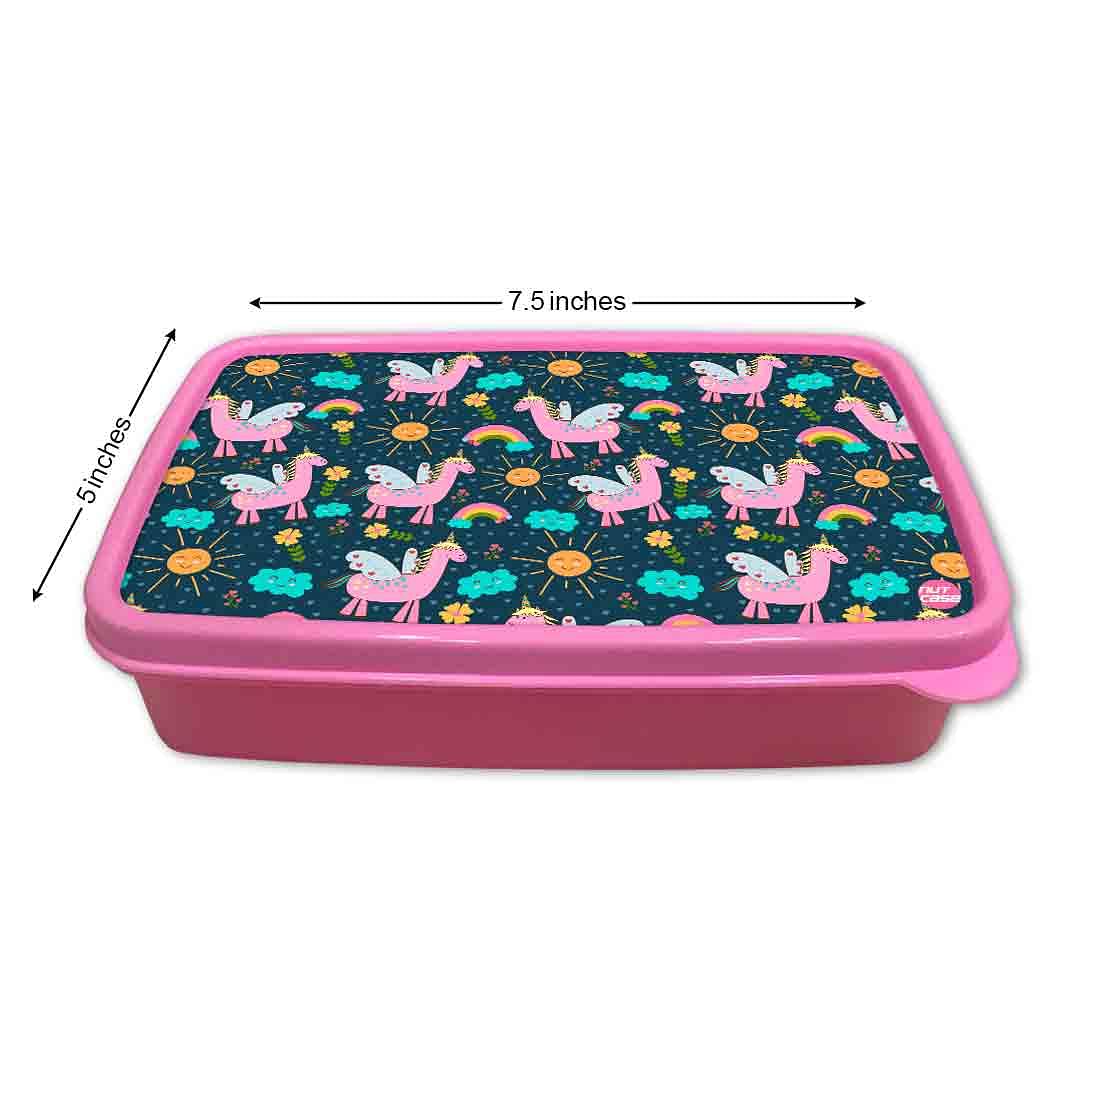 Buy Nutcase Designer Snack Box for Kids School Plastic Lunch Box for Girls  - Ideal Return Gifts for Birthday - Cute Elephant Online at Low Prices in  India - Amazon.in